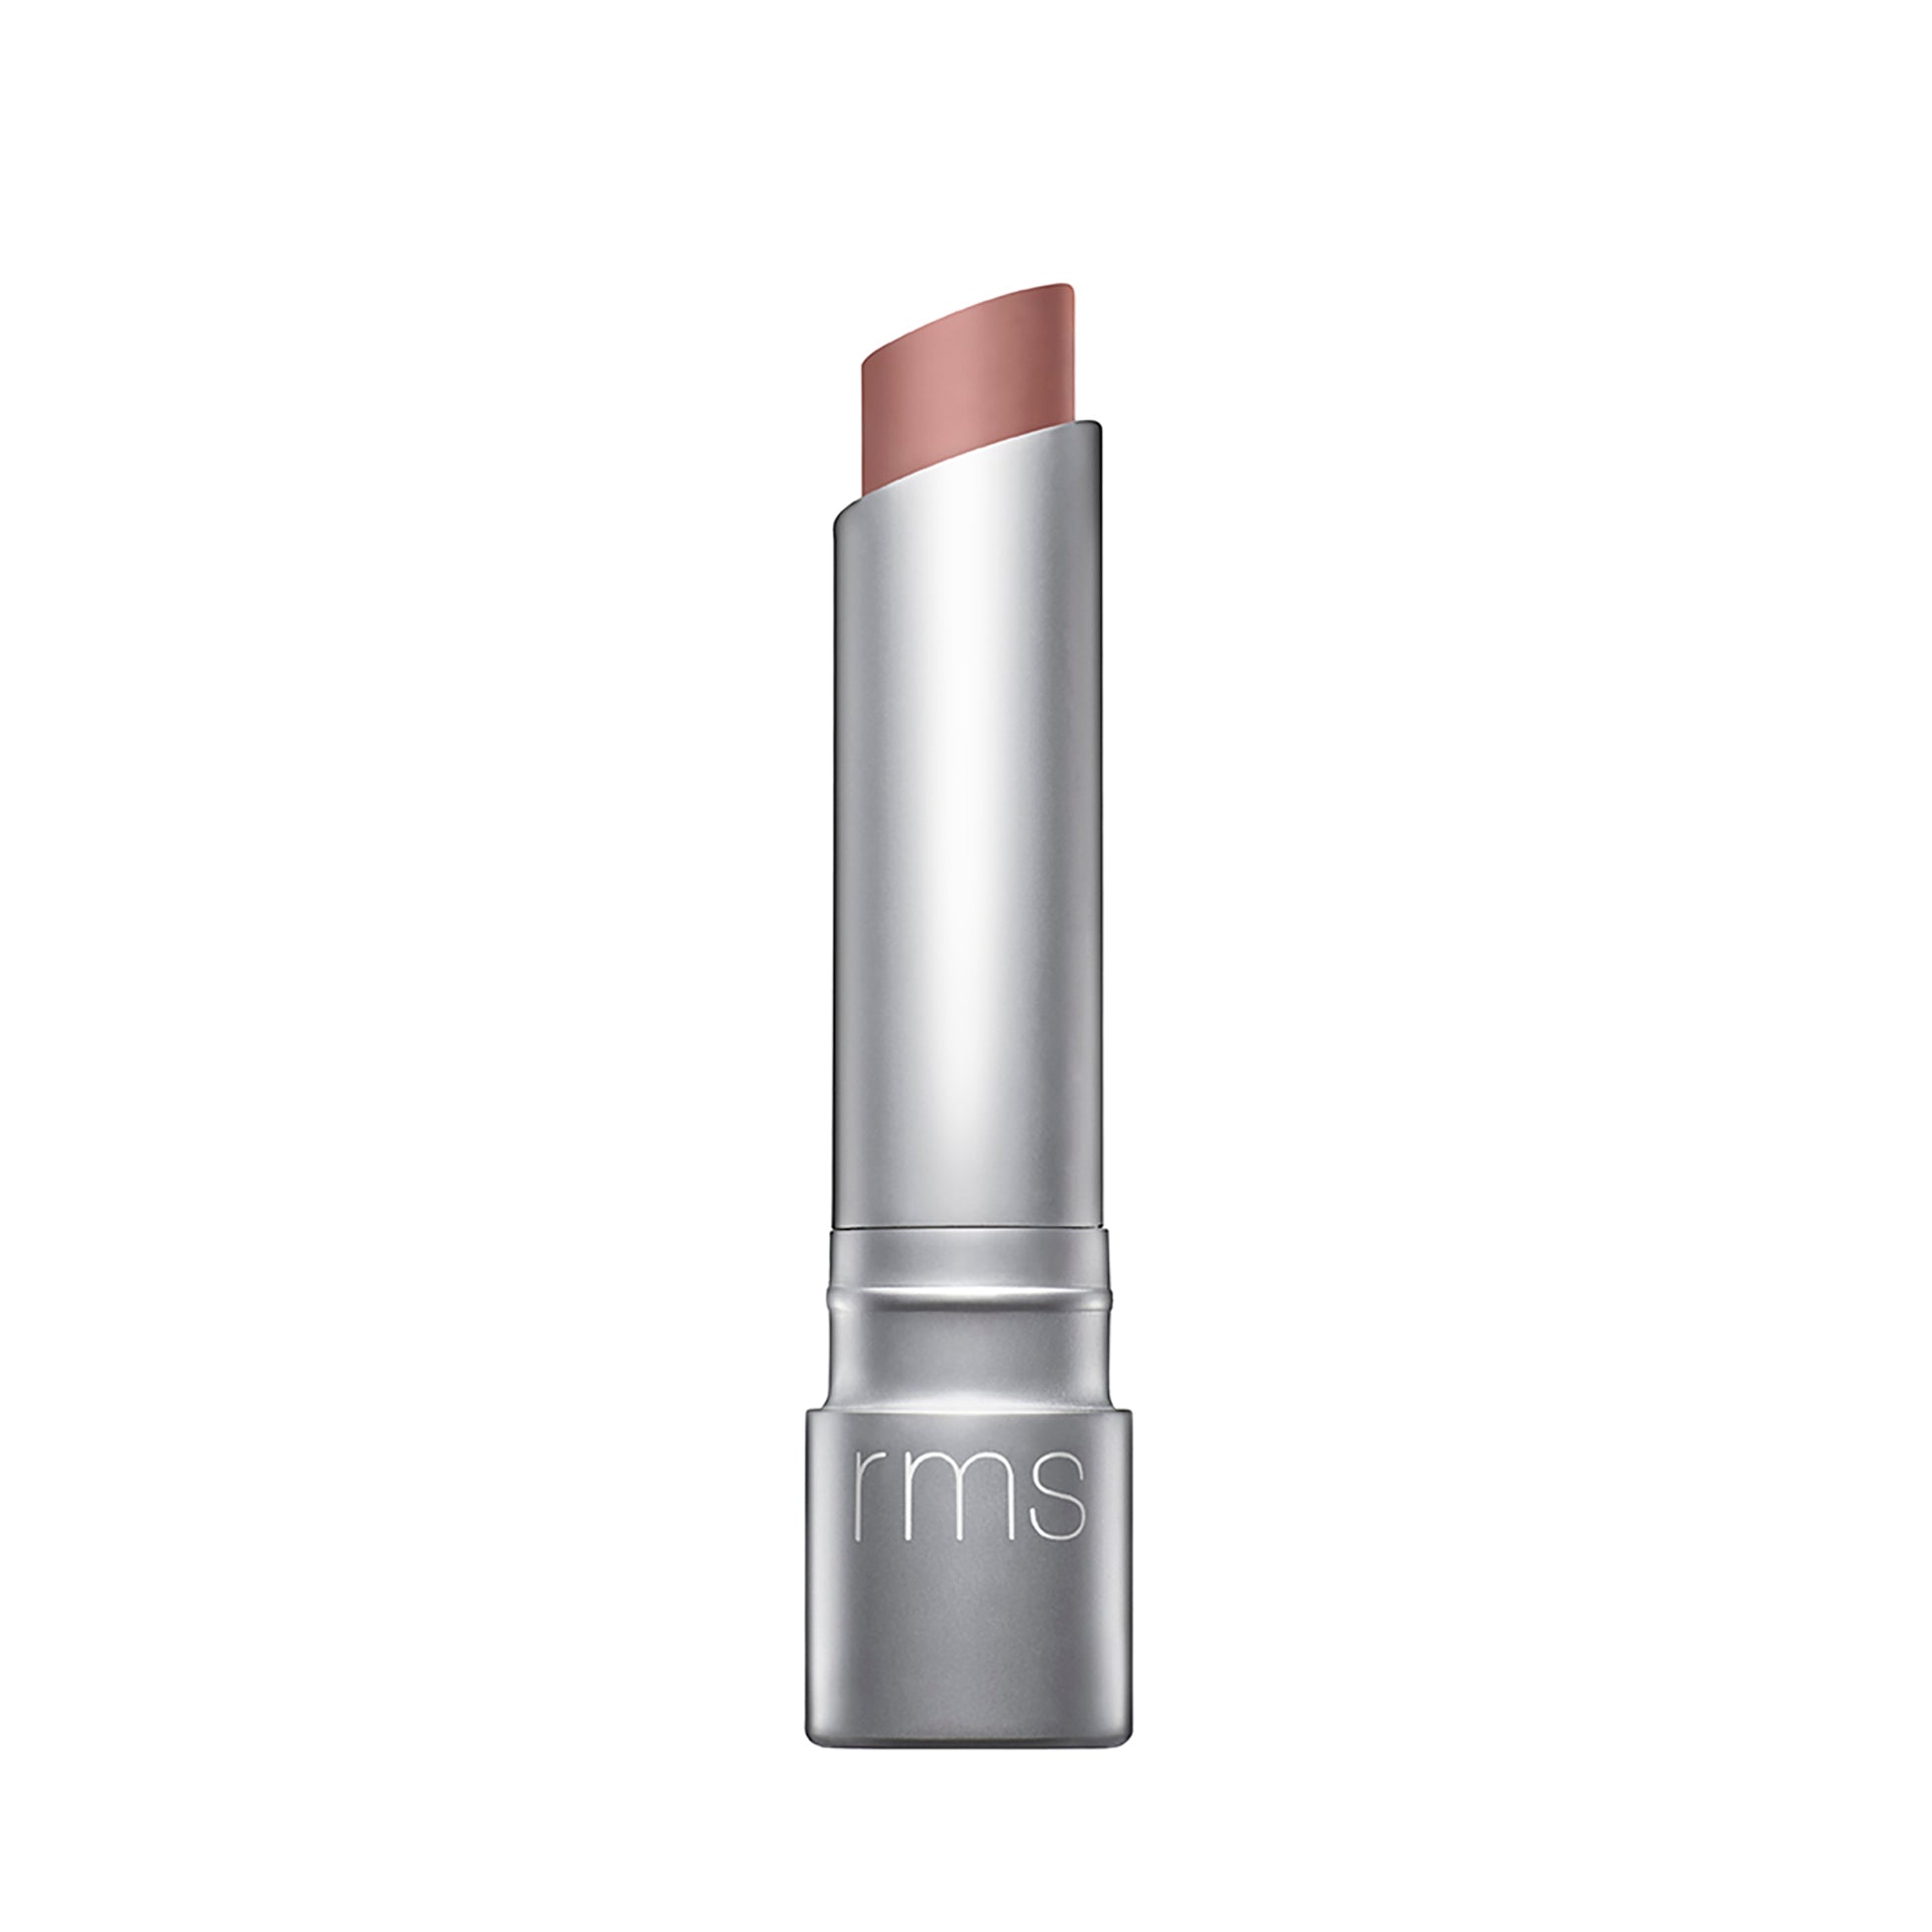 RMS BEAUTY Wild With Desire Lipstick magic hour